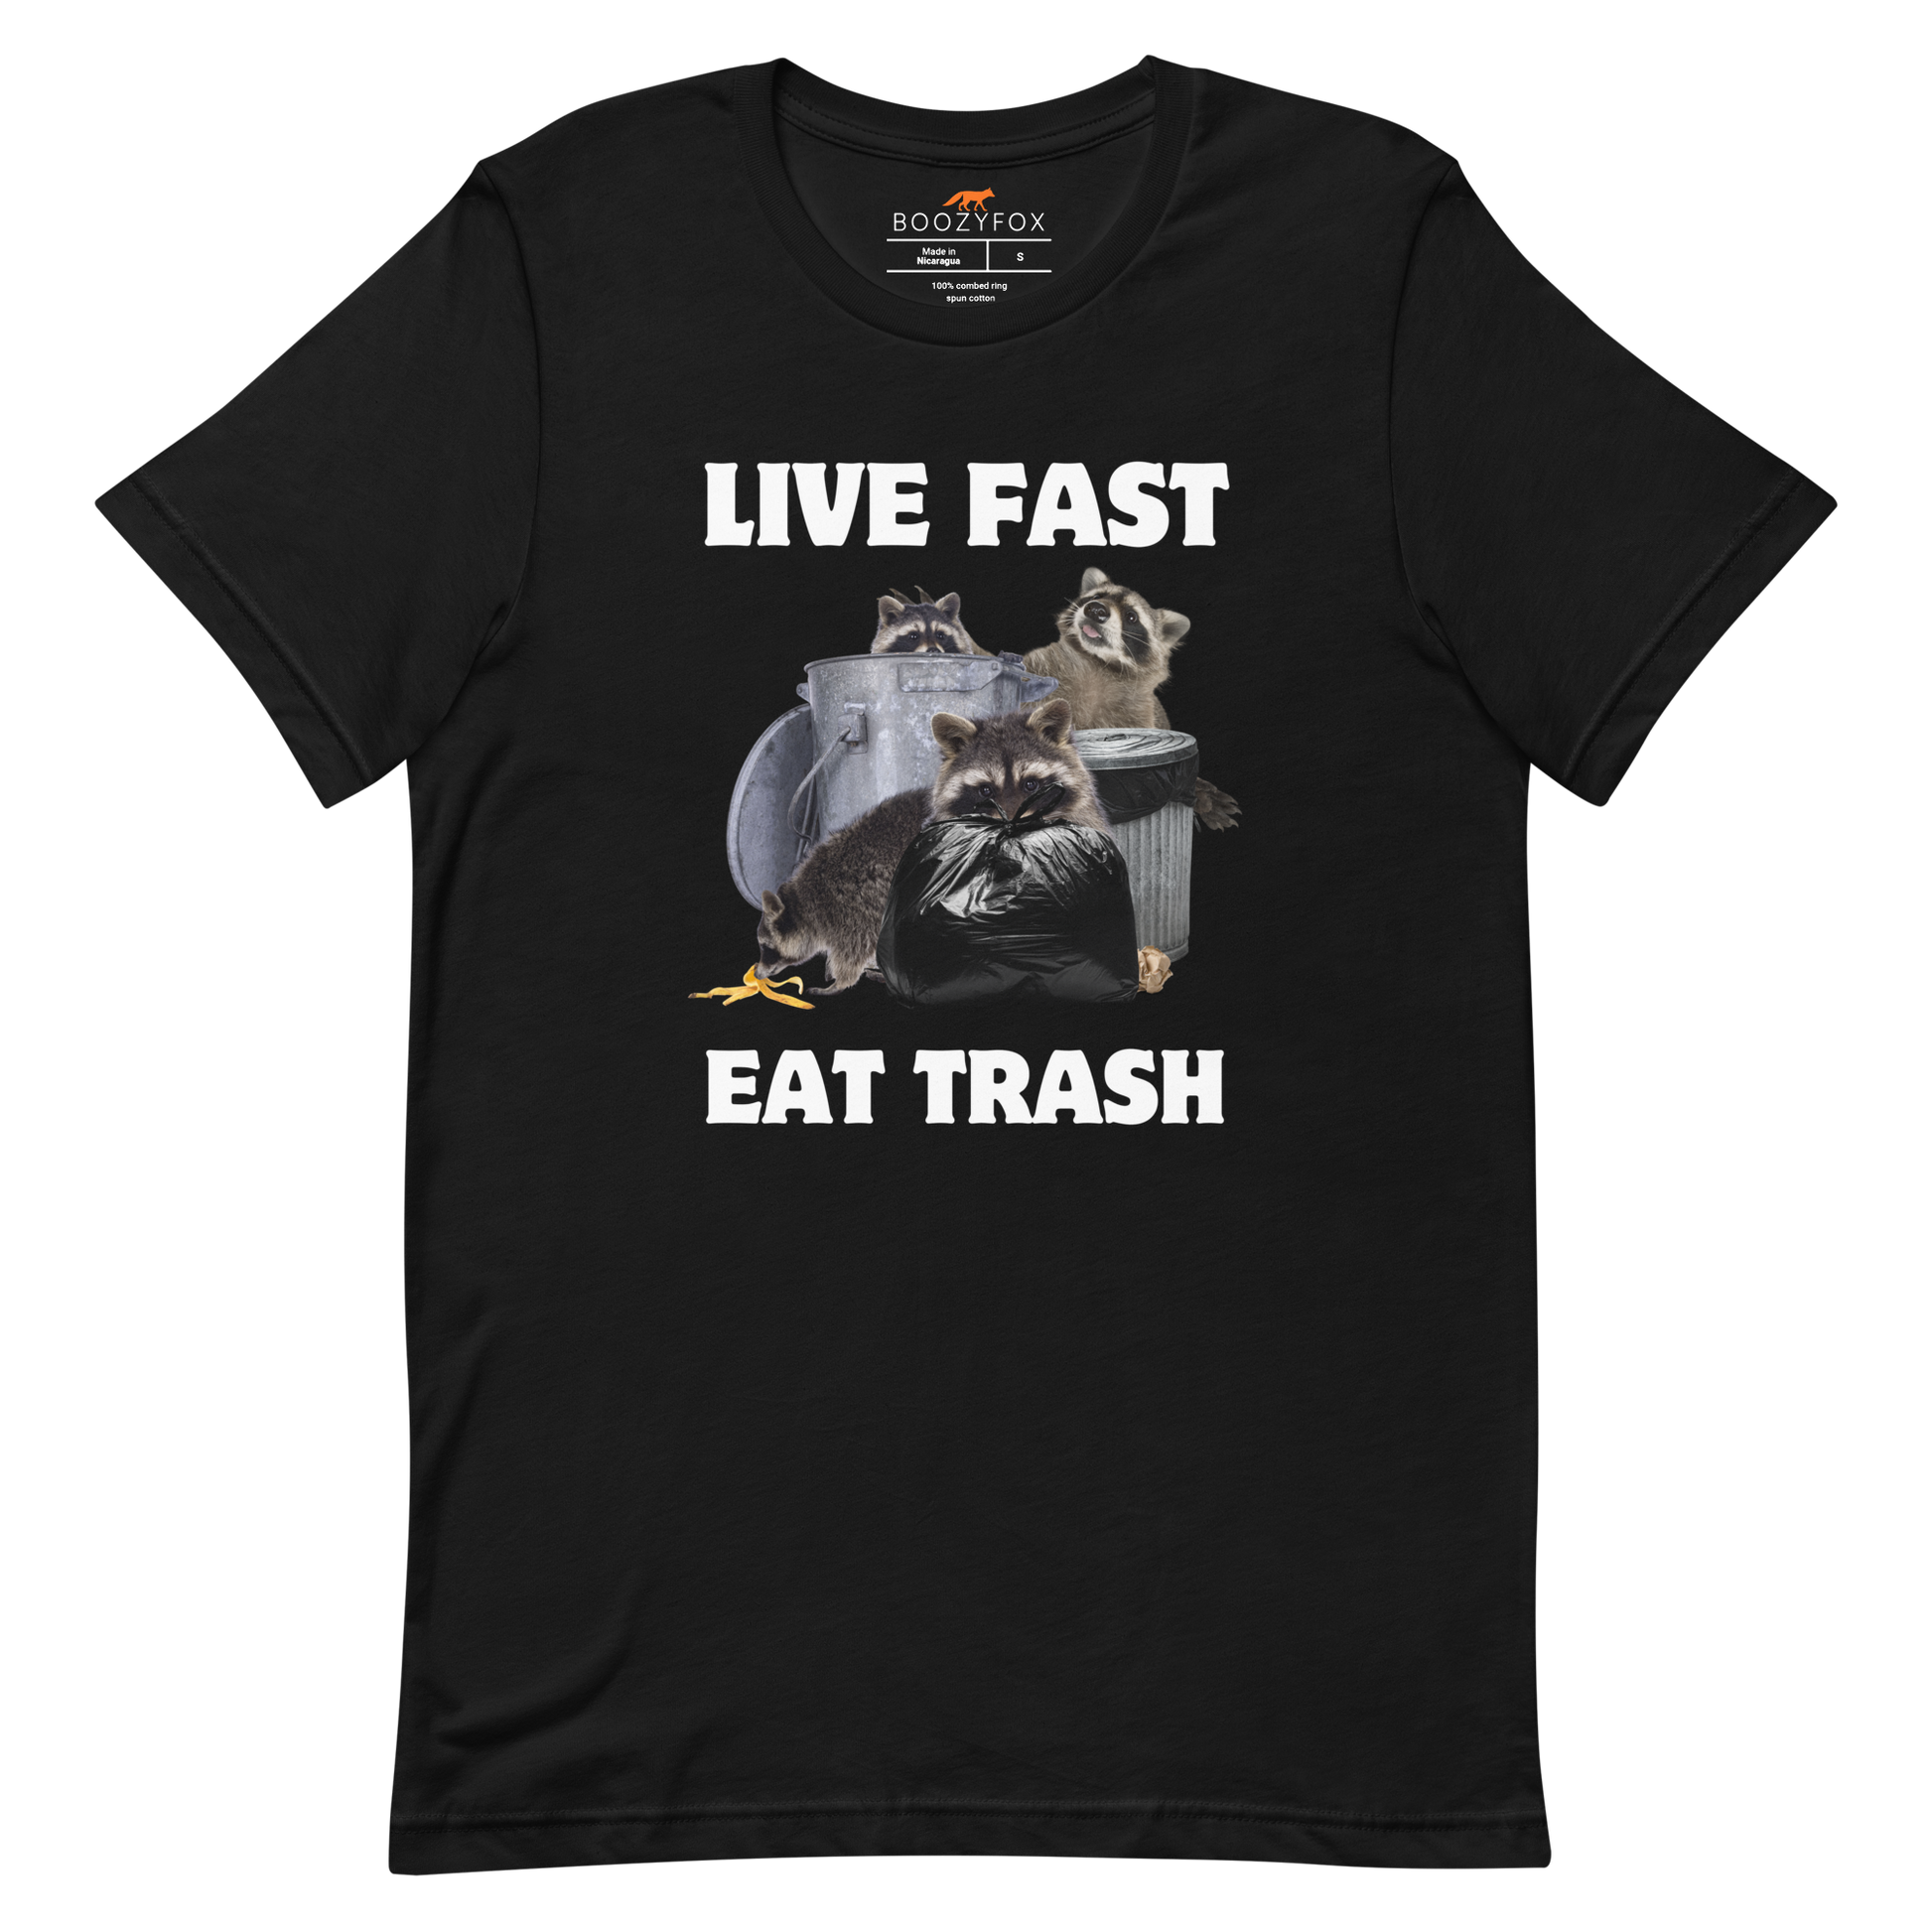 Black Premium Raccoon Tee featuring a funny 'Live Fast Eat Trash' graphic on the chest - Funny Graphic Raccoon Tees - Boozy Fox